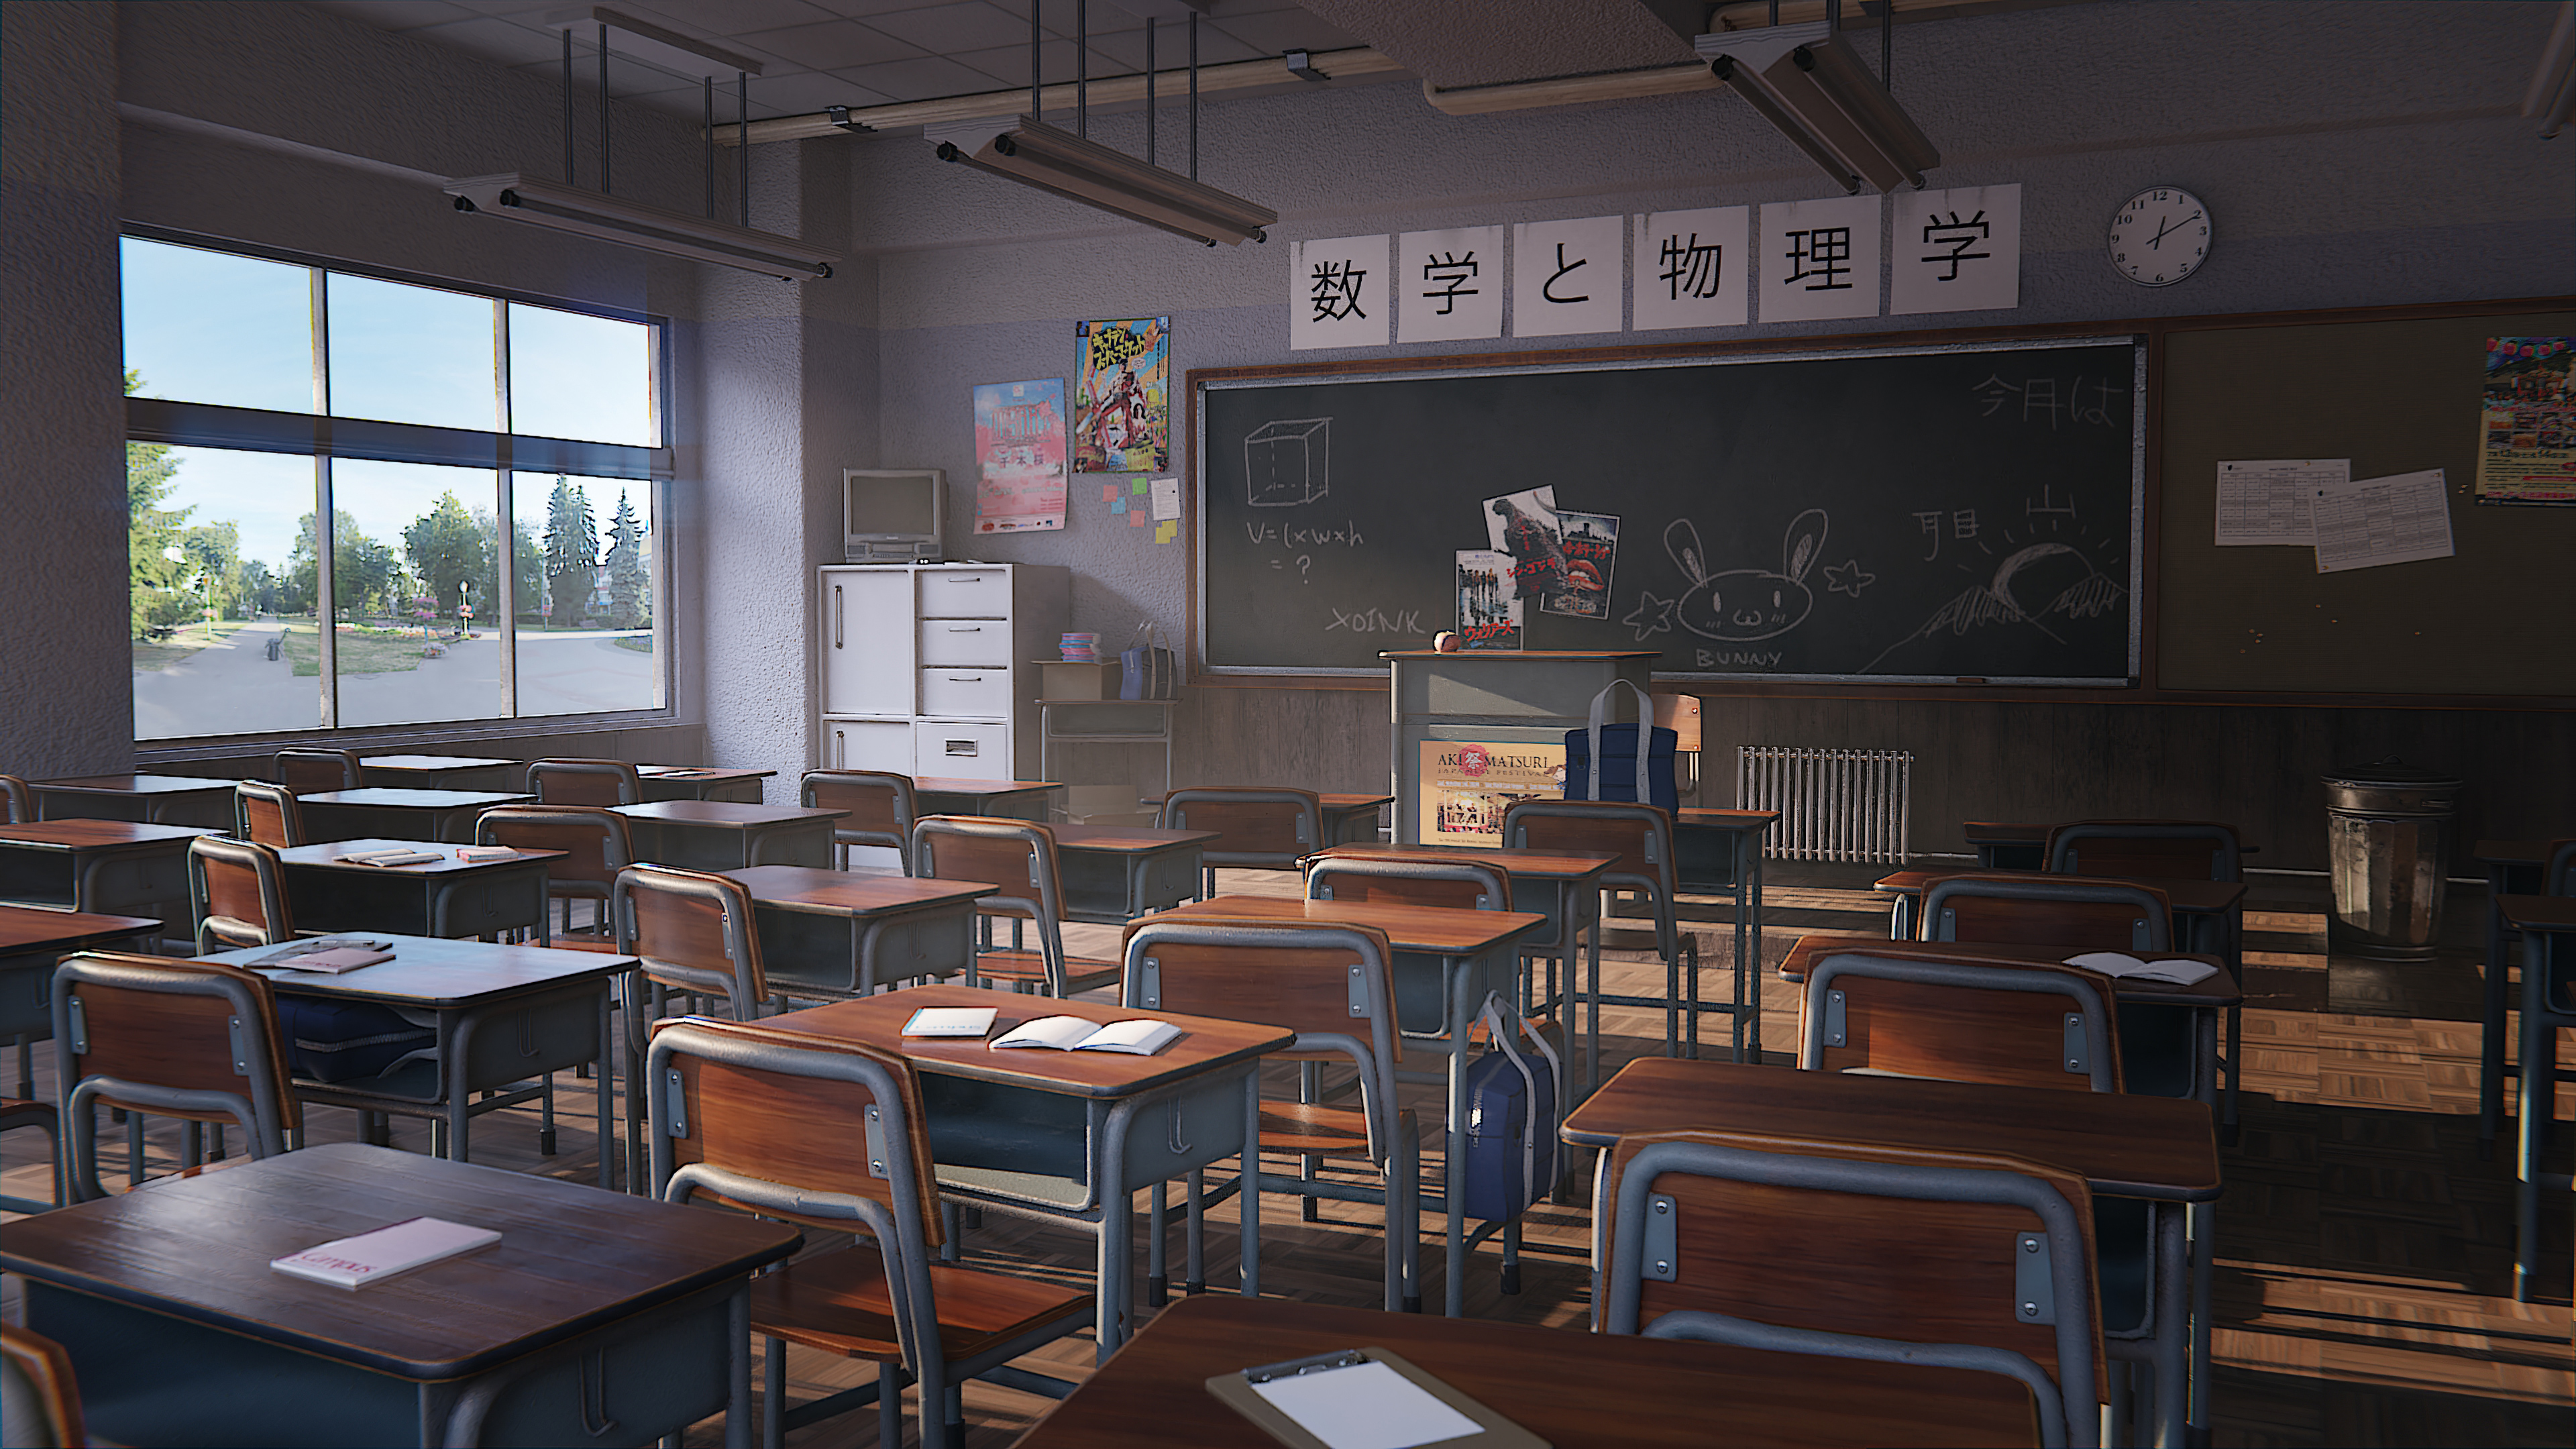 Classroom Background Images, HD Pictures and Wallpaper For Free Download